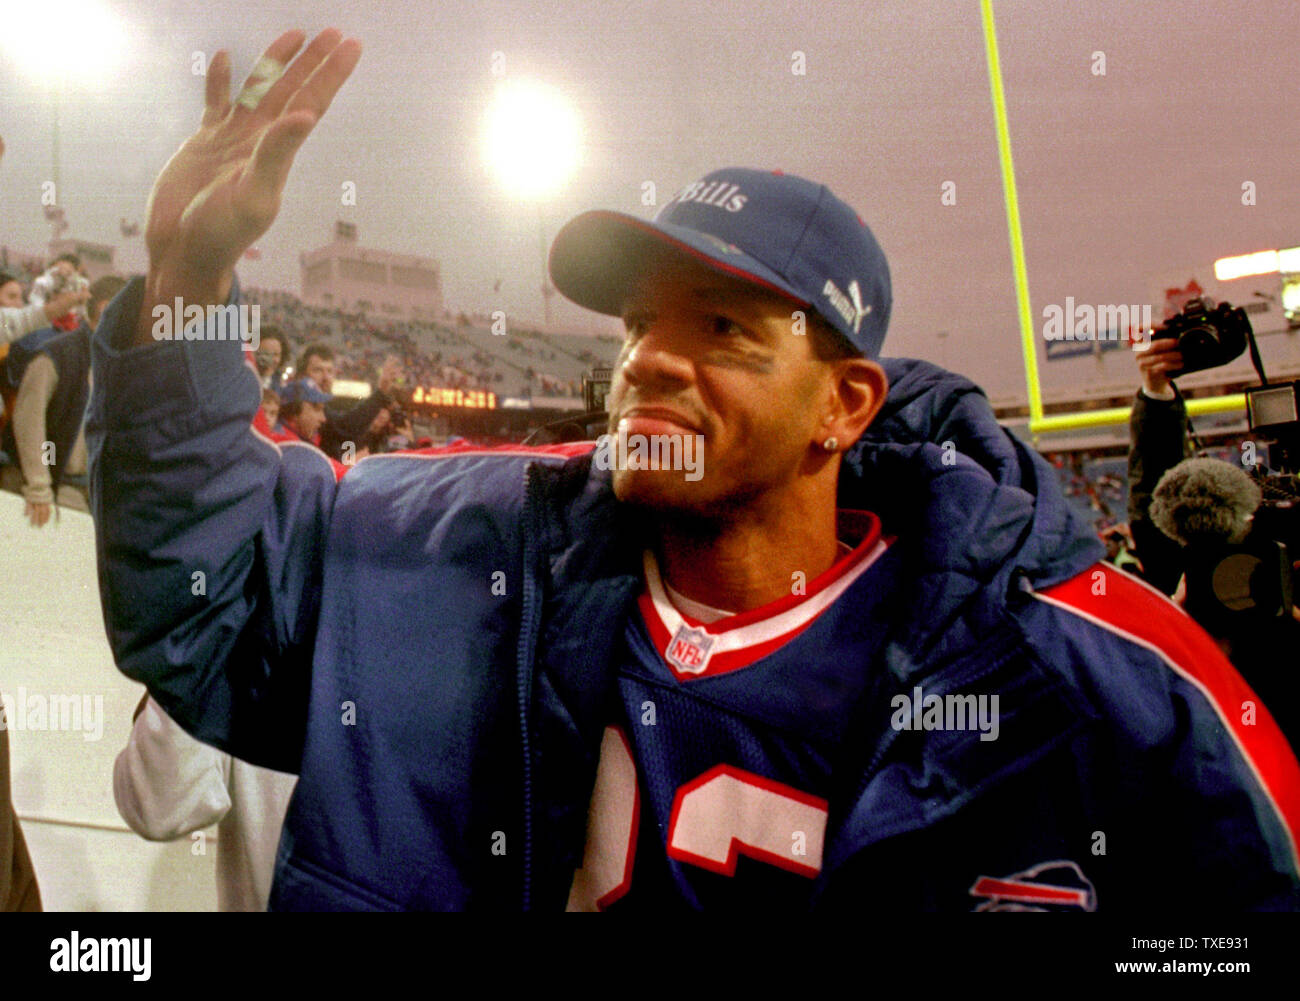 BUF2000010210 - 02 JANUARY 2000 - BUFFALO, NEW YORK, USA: Buffalo Bills  wide receiver Andre Reed waves to fans as he makes an emotional farewell  after becoming the NFL's all time second